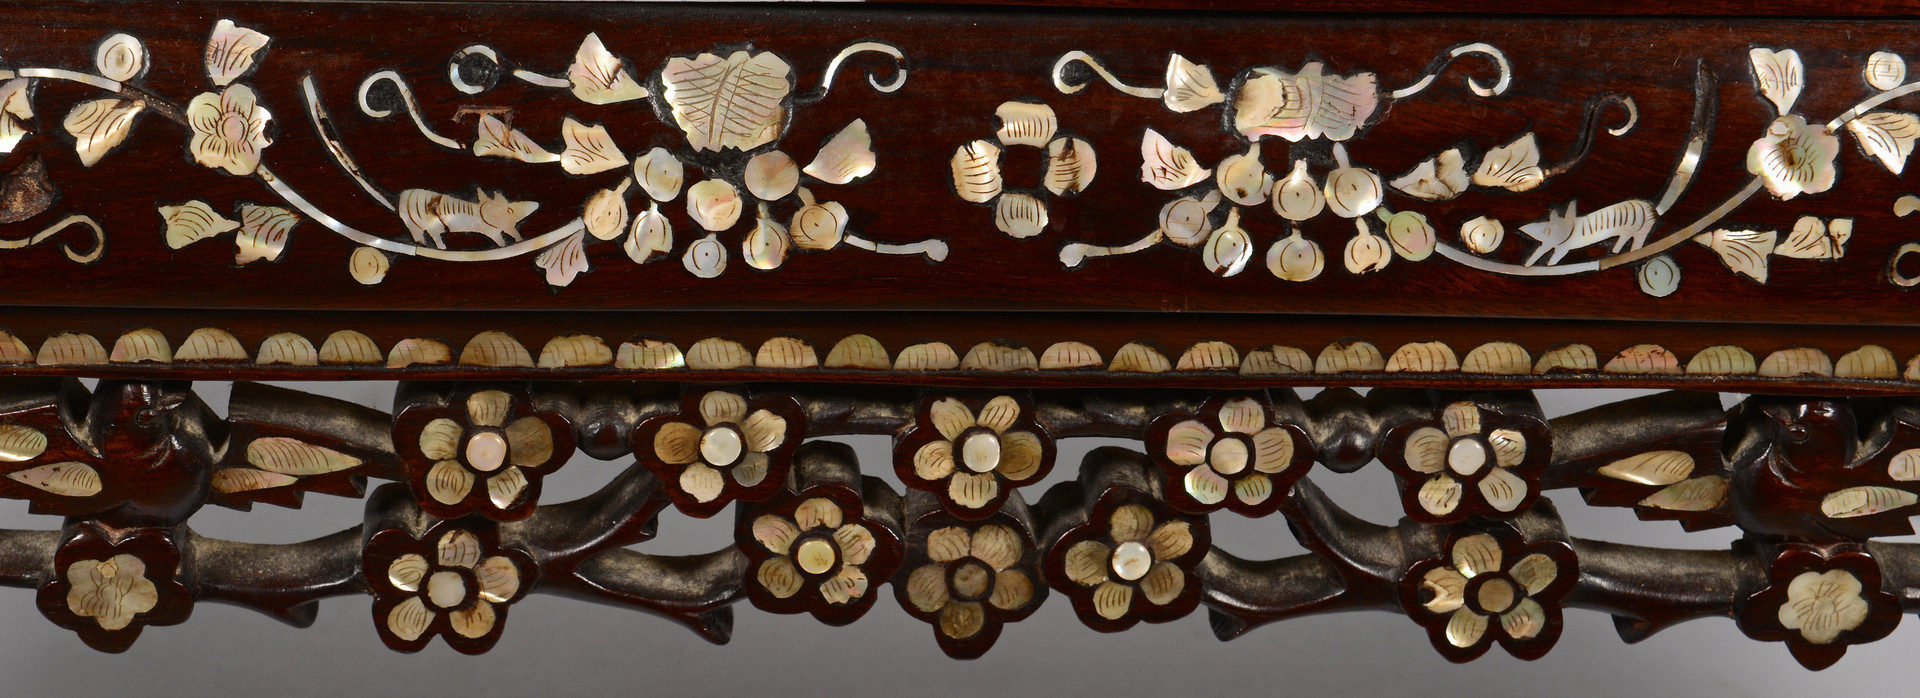 Lot 222: Inlaid Rosewood Low Table